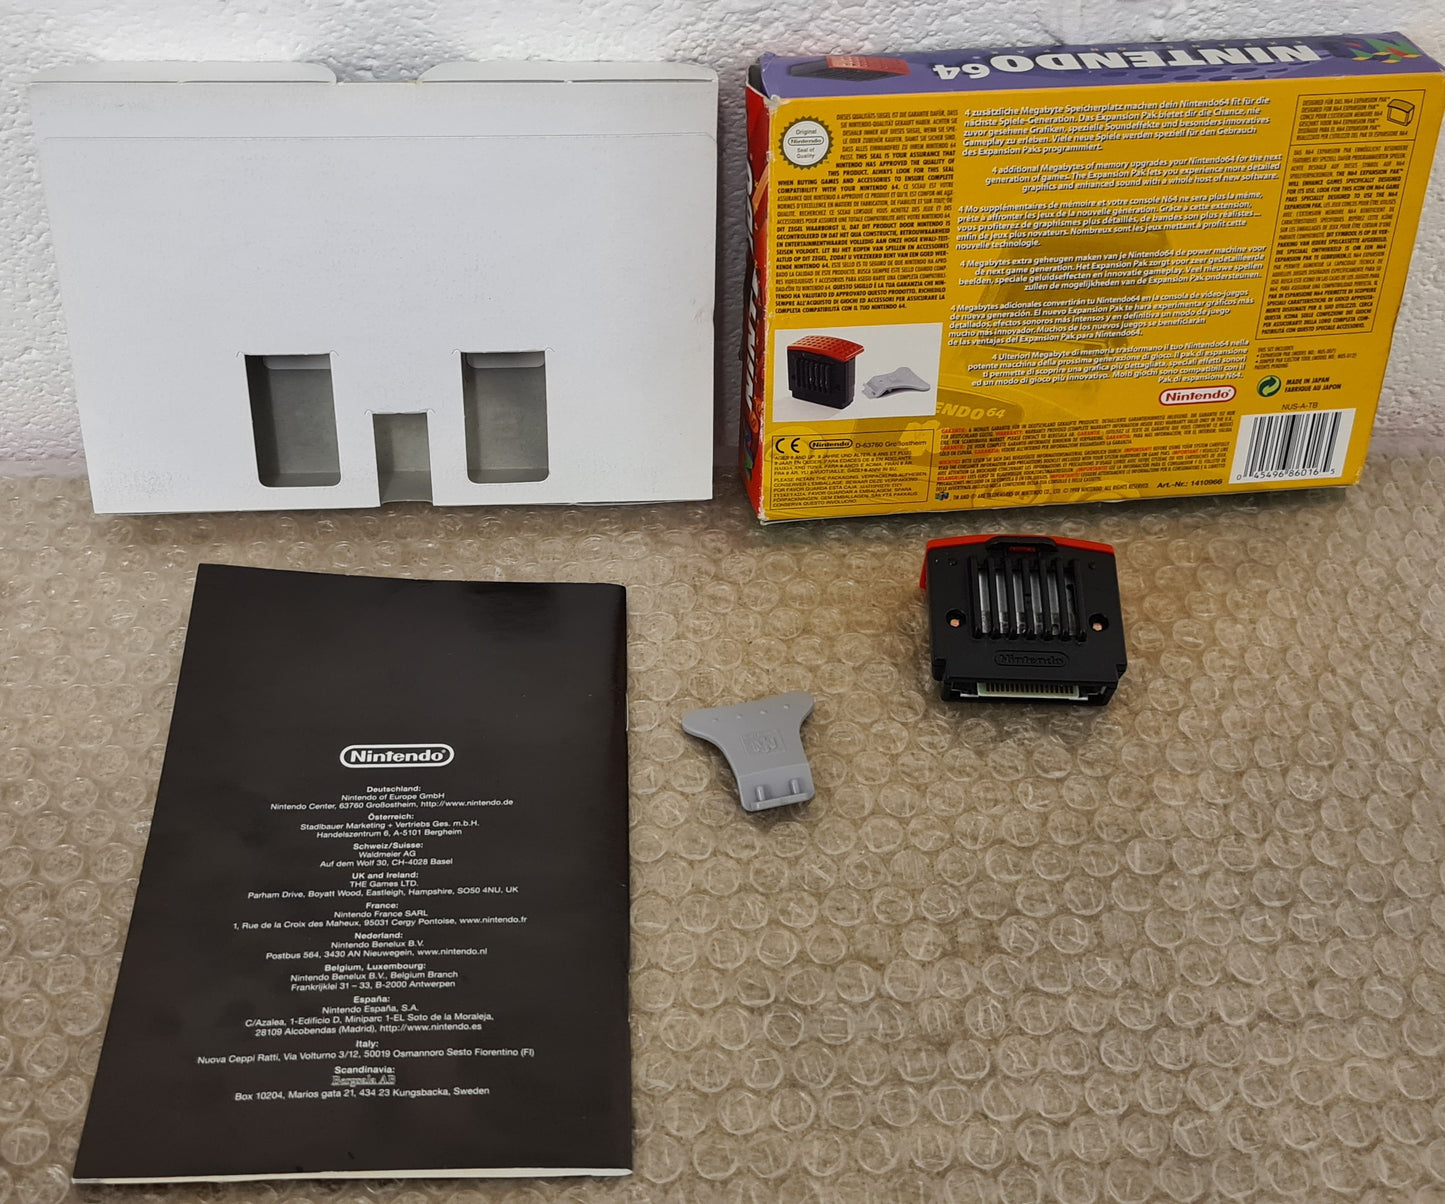 Boxed Expansion Pak Nintendo 64 (N64) Accessory